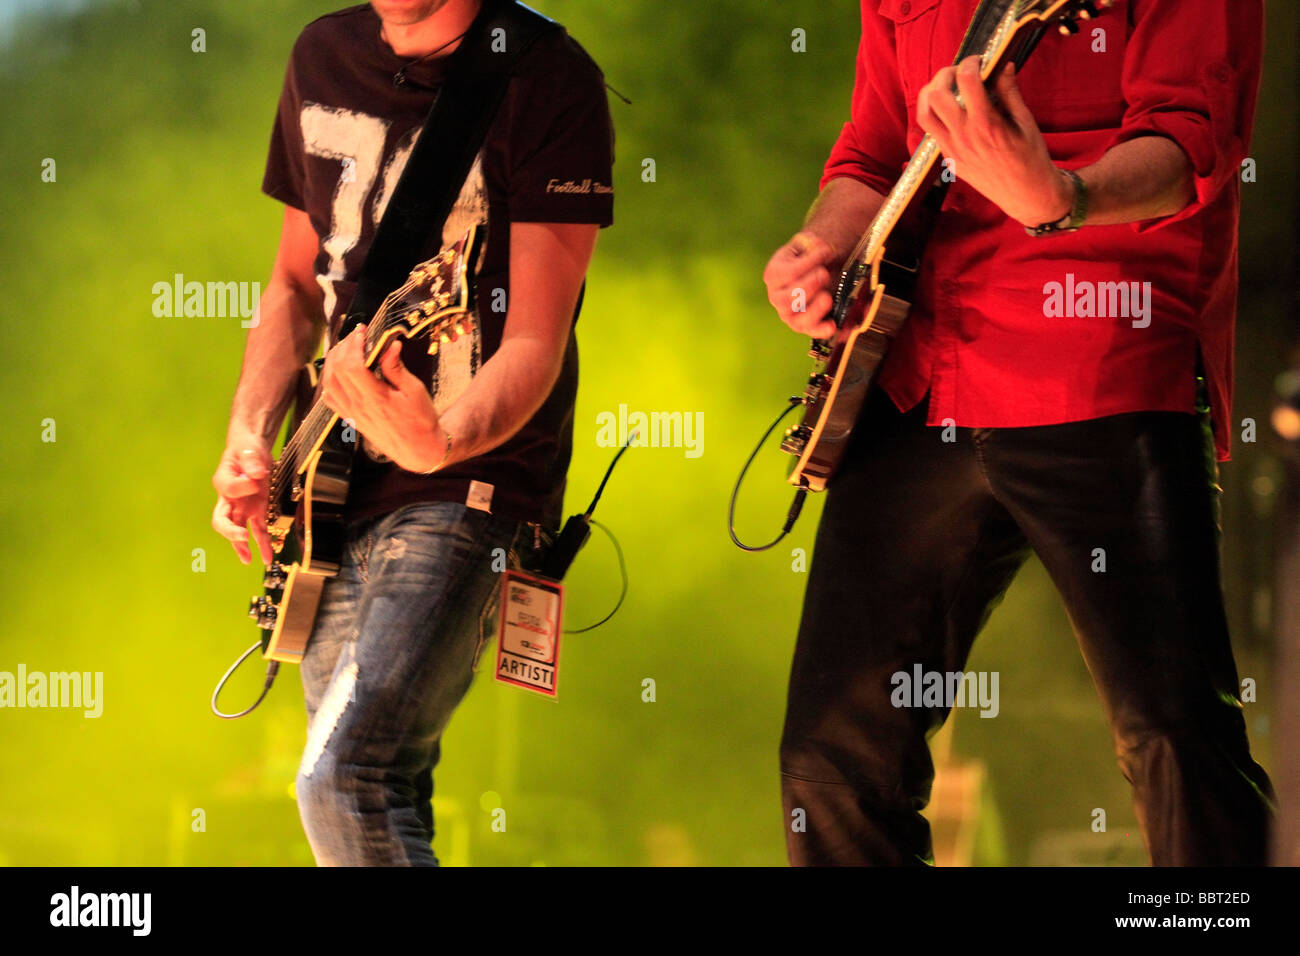 rock musicians playing at a live concert Stock Photo